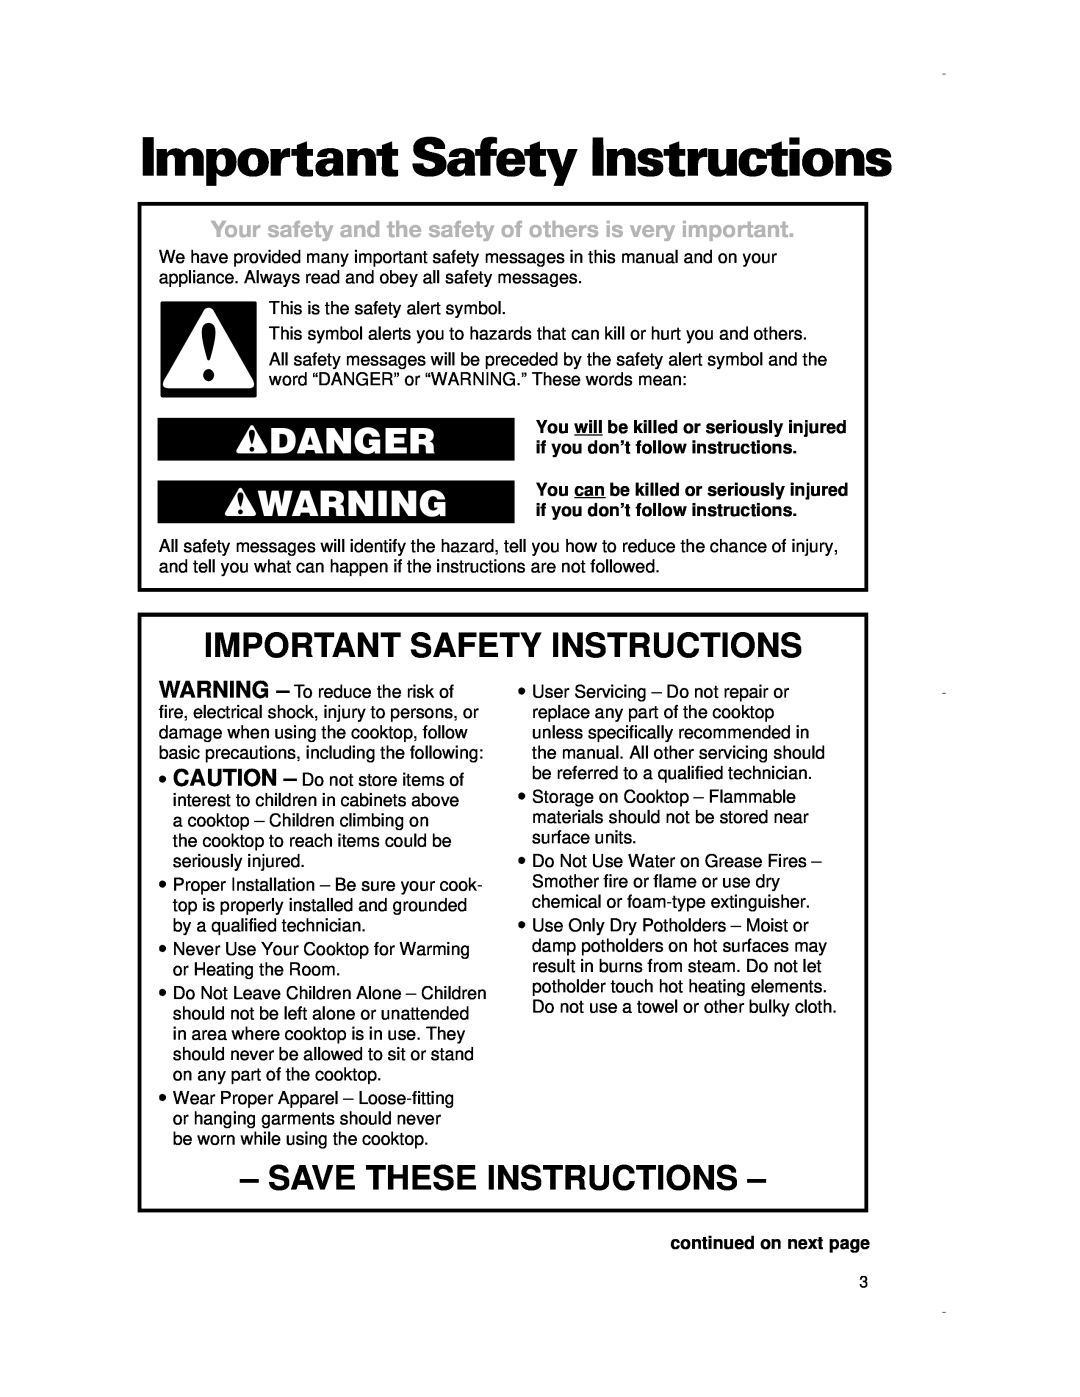 Whirlpool RCS3014G, RCS3614G, RCS2012G, RCS2002G Important Safety Instructions, wDANGER wWARNING, Save These Instructions 